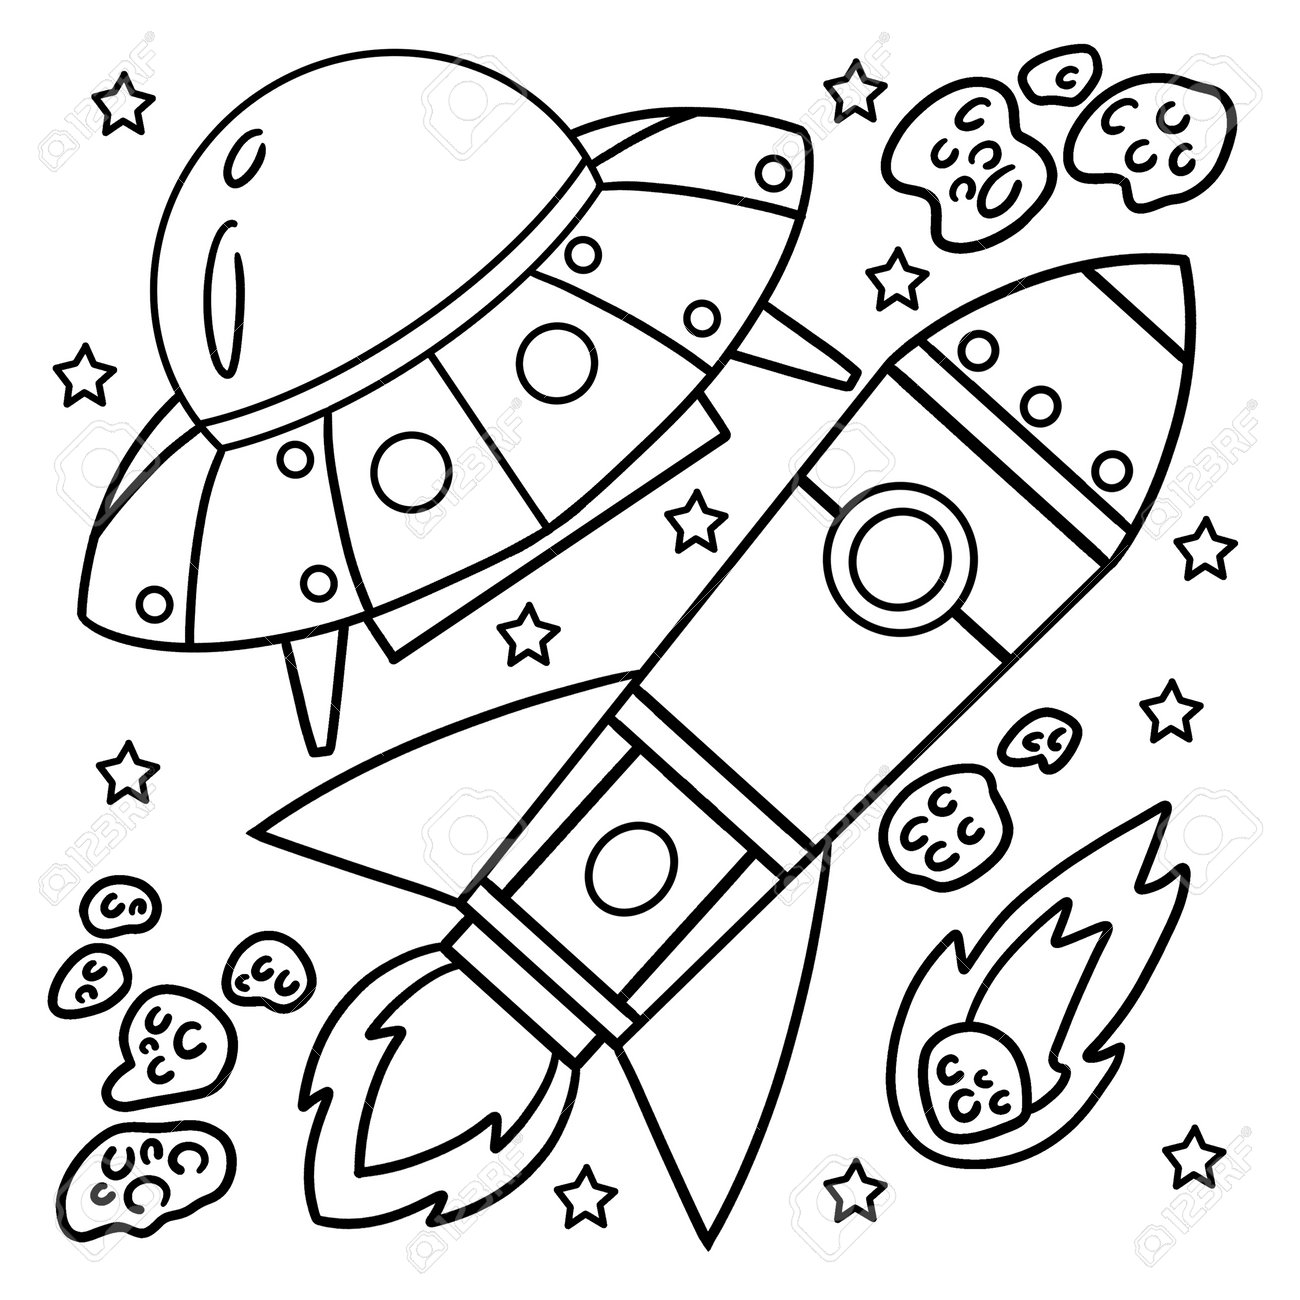 Ufo and rocket ship in space coloring page royalty free svg cliparts vectors and stock illustration image